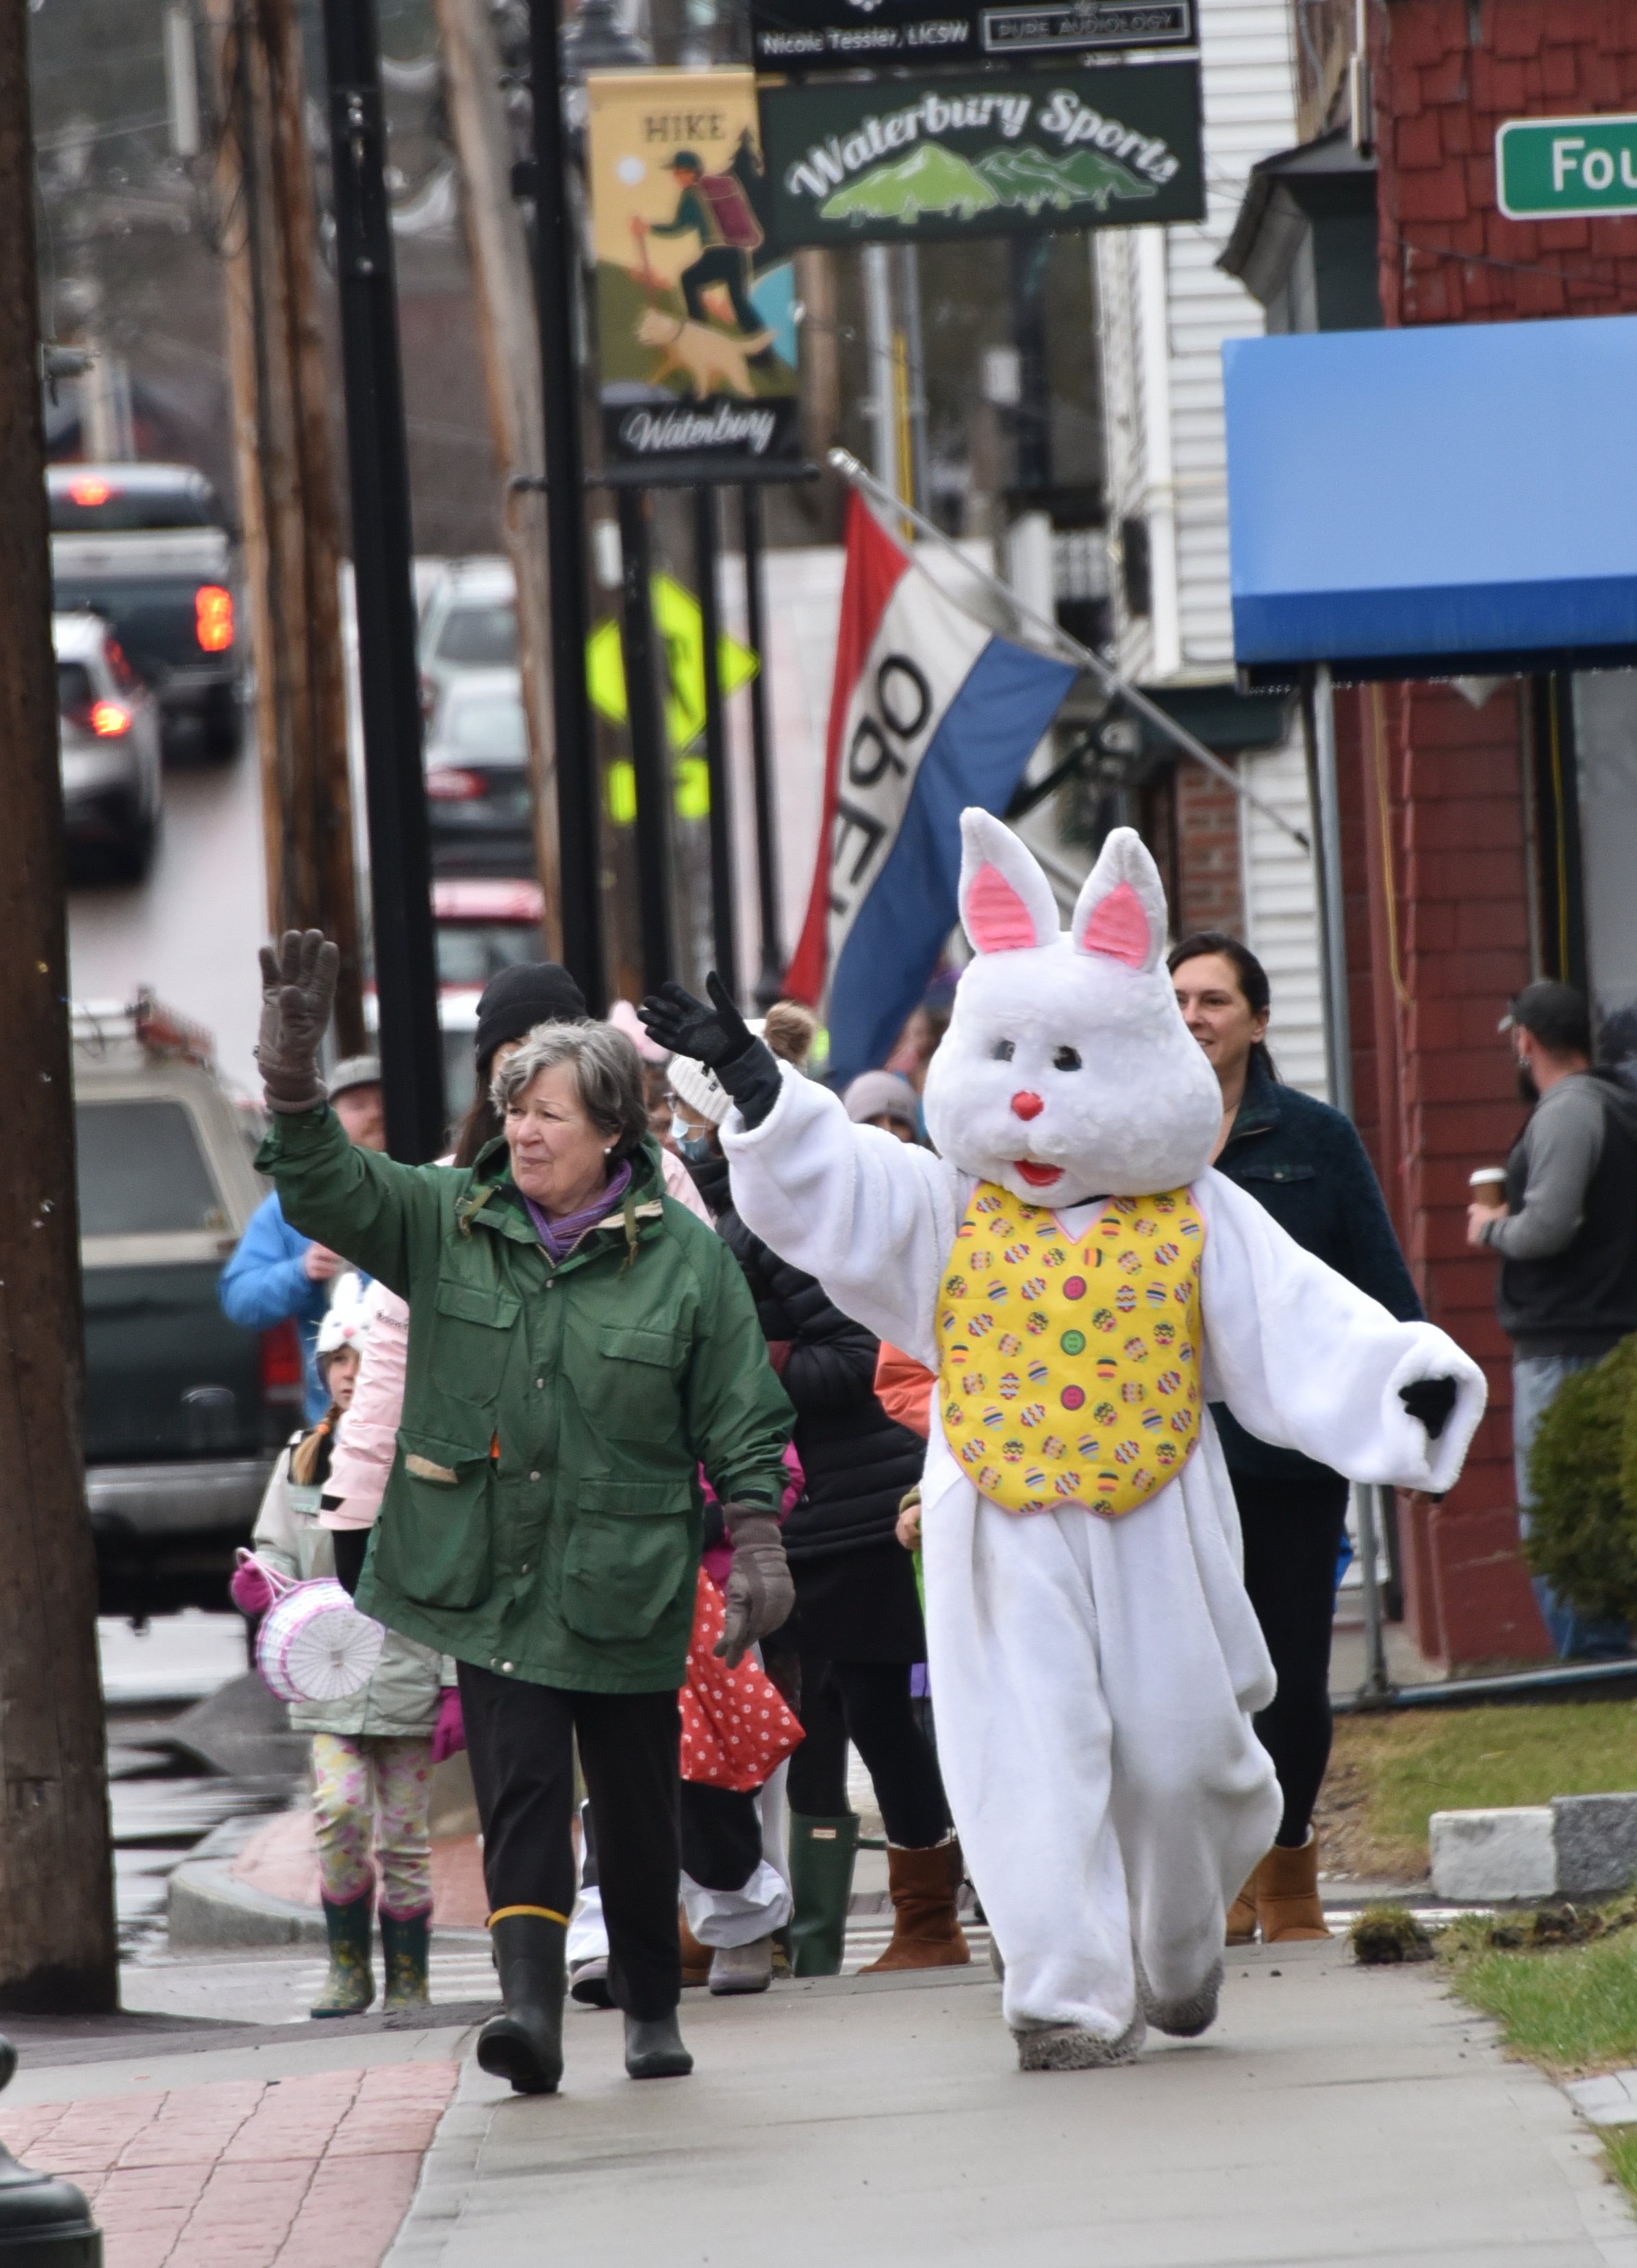  The Easter Bunny gets an escort from Sandy Lewis as the parade makes its way down Main Street. Photo by Gordon Miller 